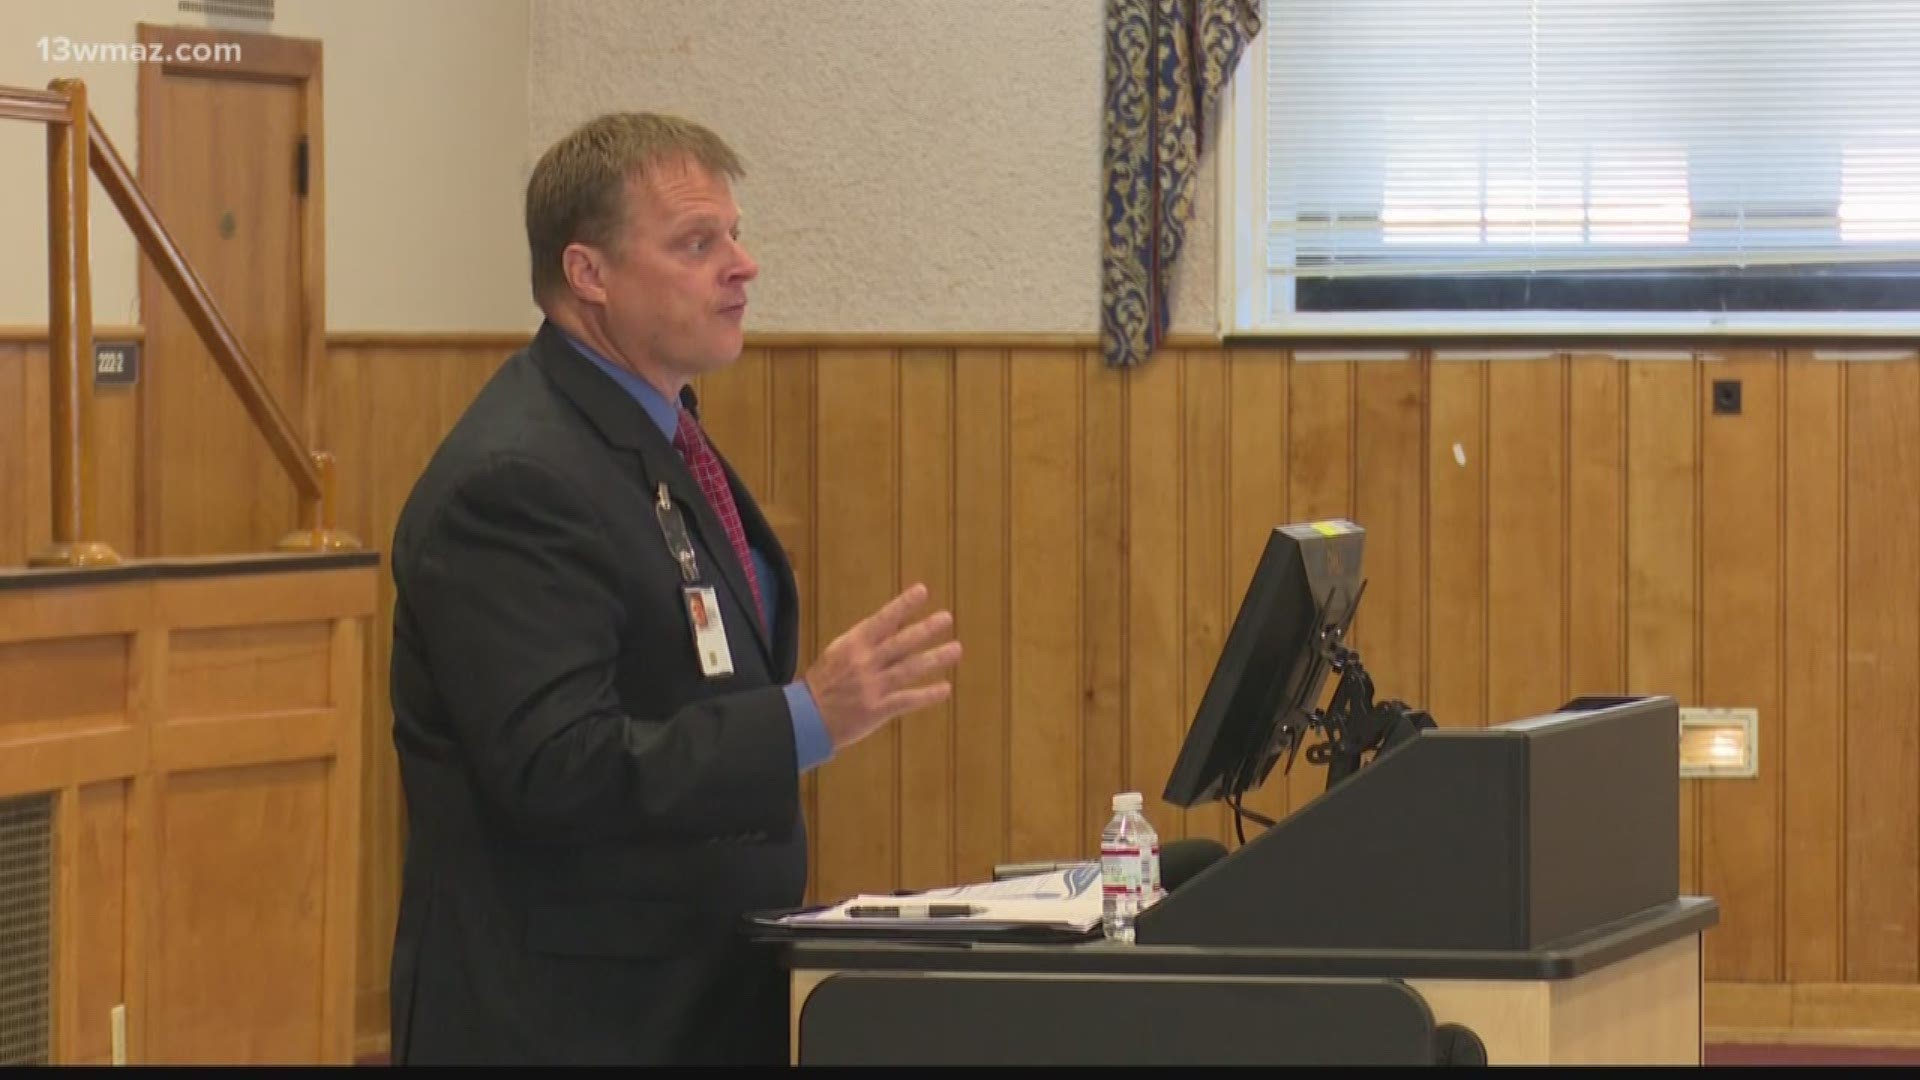 The Carl Vinson VA introduced its new director David Whitmer to veterans Tuesday. More than 50 veterans packed the auditorium to hear Whitmer's plan to fix the Dublin VA and talk about their own concerns.